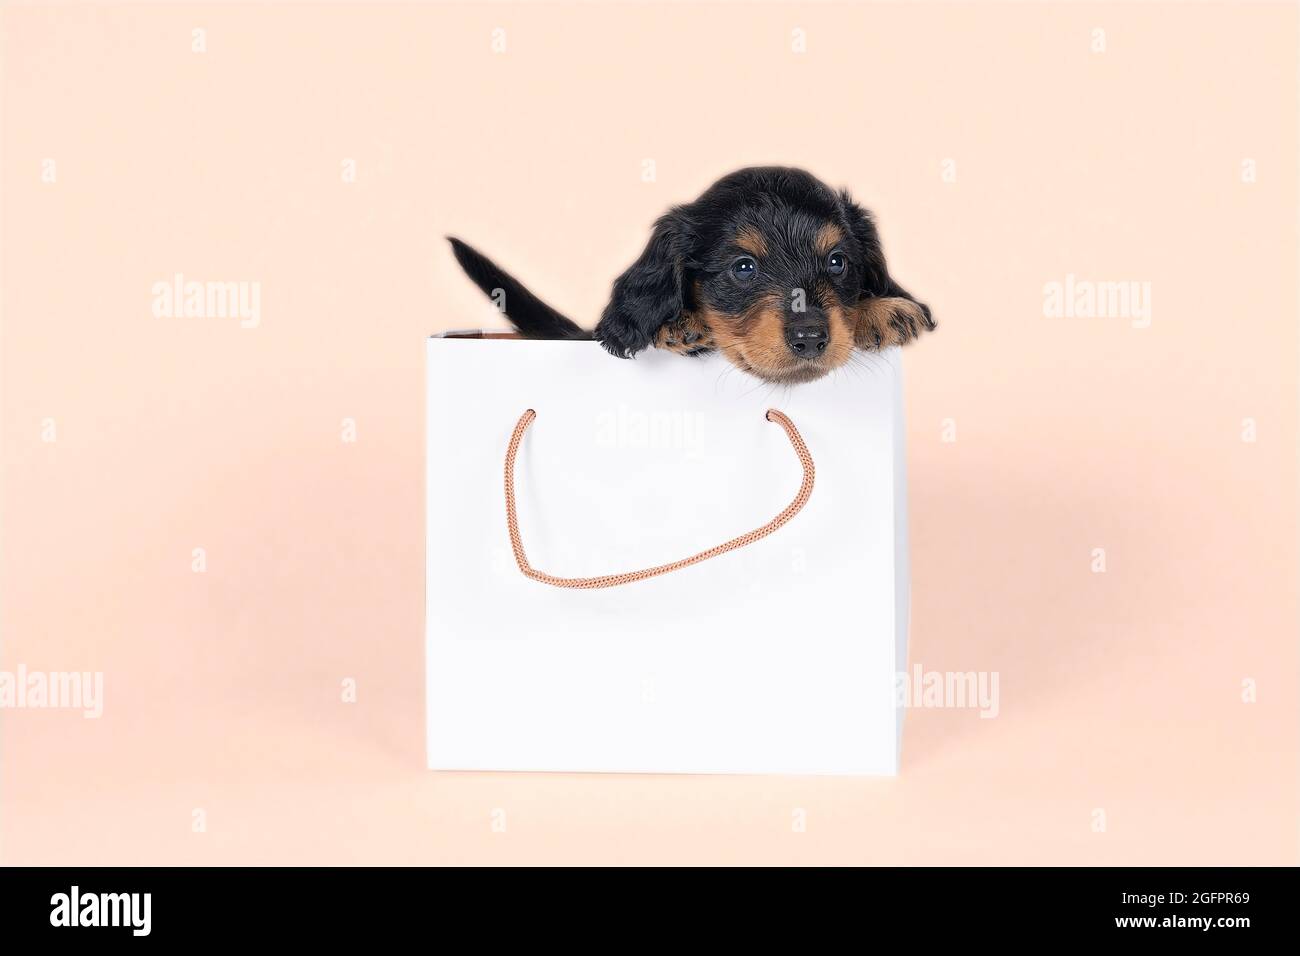 One bi-colored and blonde longhaired  Dachshund dog pup in a shoppingbag isolated on a beige background Stock Photo